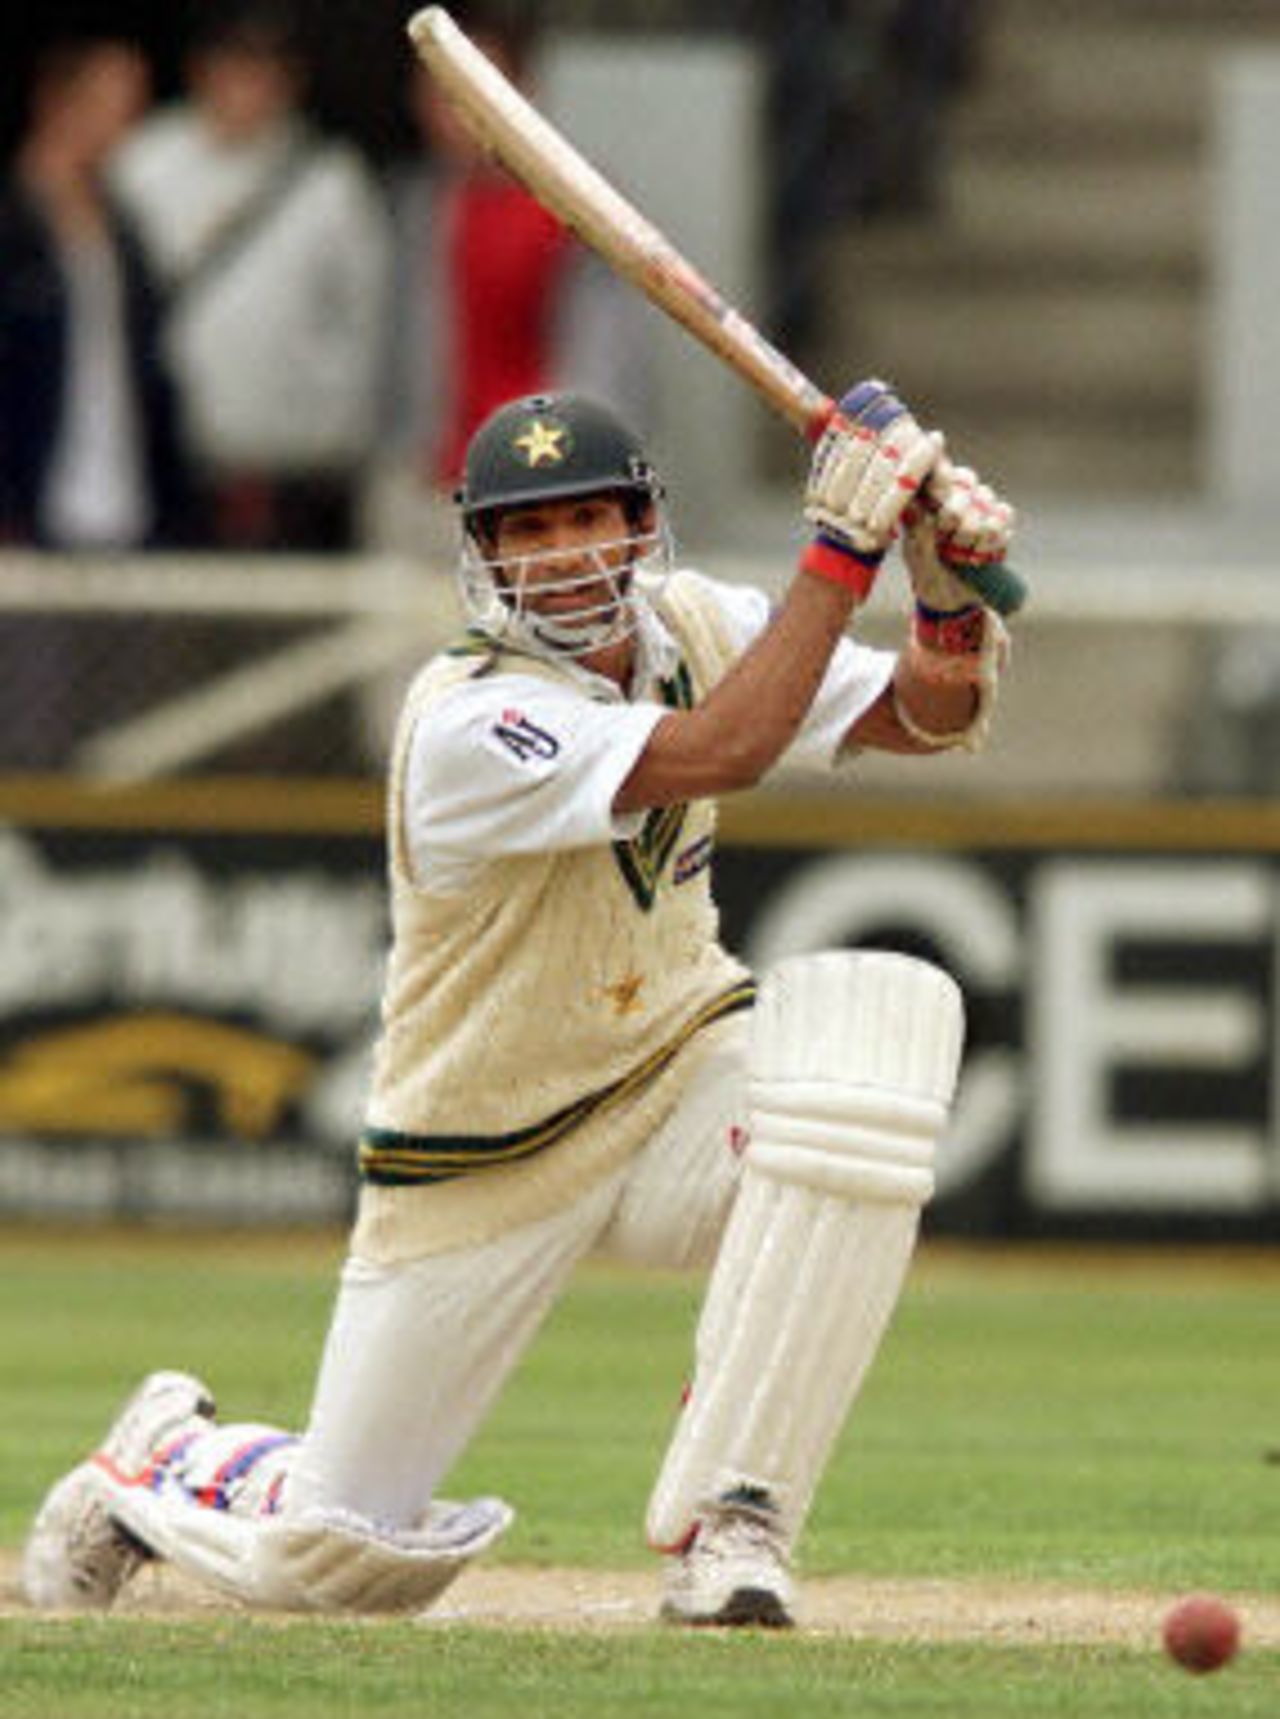 Yousuf Youhana cracks a ball towards the boundary, day 3, 2nd Test at Christchurch, 15-19 March 2001.